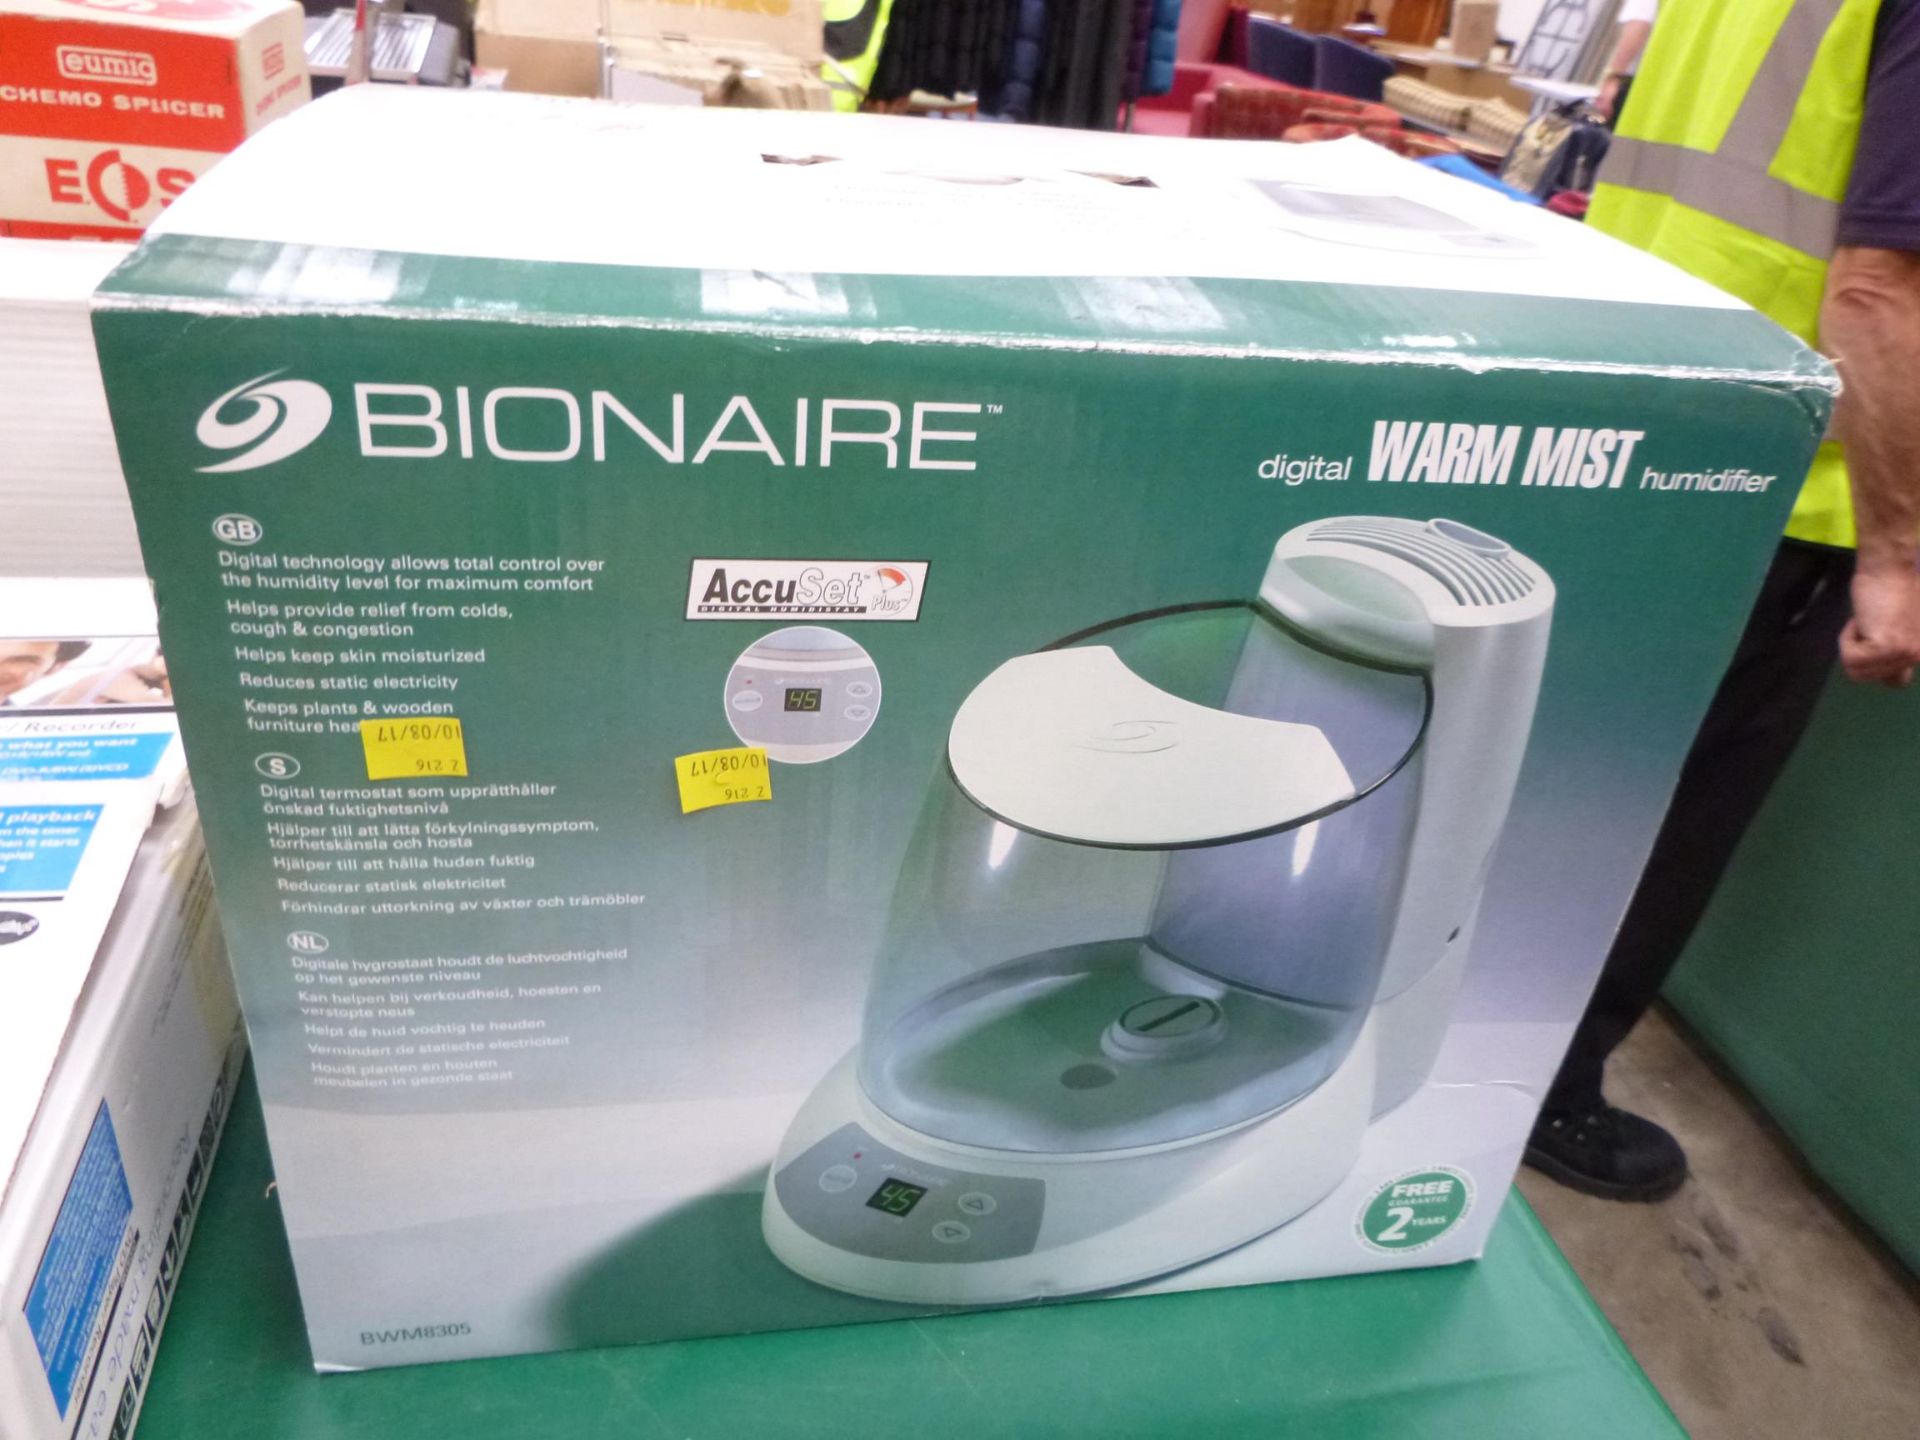 A Philips DVDR3380 DVD Player/Recorder (in box) along with a Bionaire Digital Warm Mist Dehumidifier - Image 3 of 3